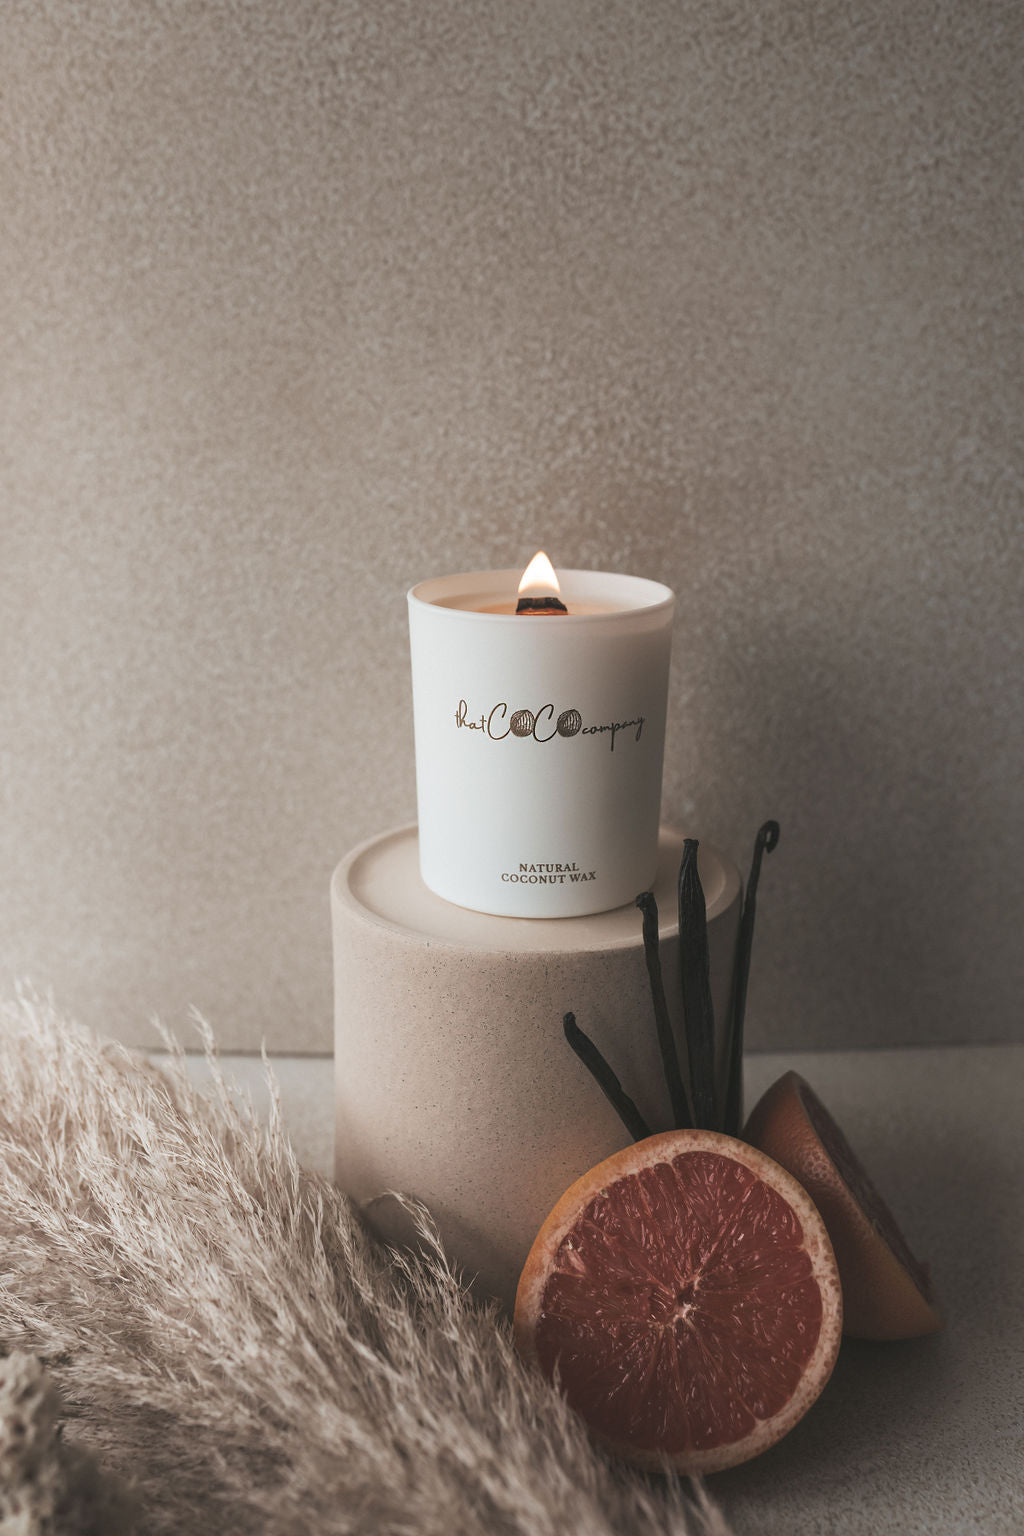  Coconut Soy Wax Blend for Candle Making - Coco Luxe (5 lbs.) -  High Fragrance Load - Ideal for Container Candles, Molds & Melts - Natural,  Vegan Friendly - You Will Love it